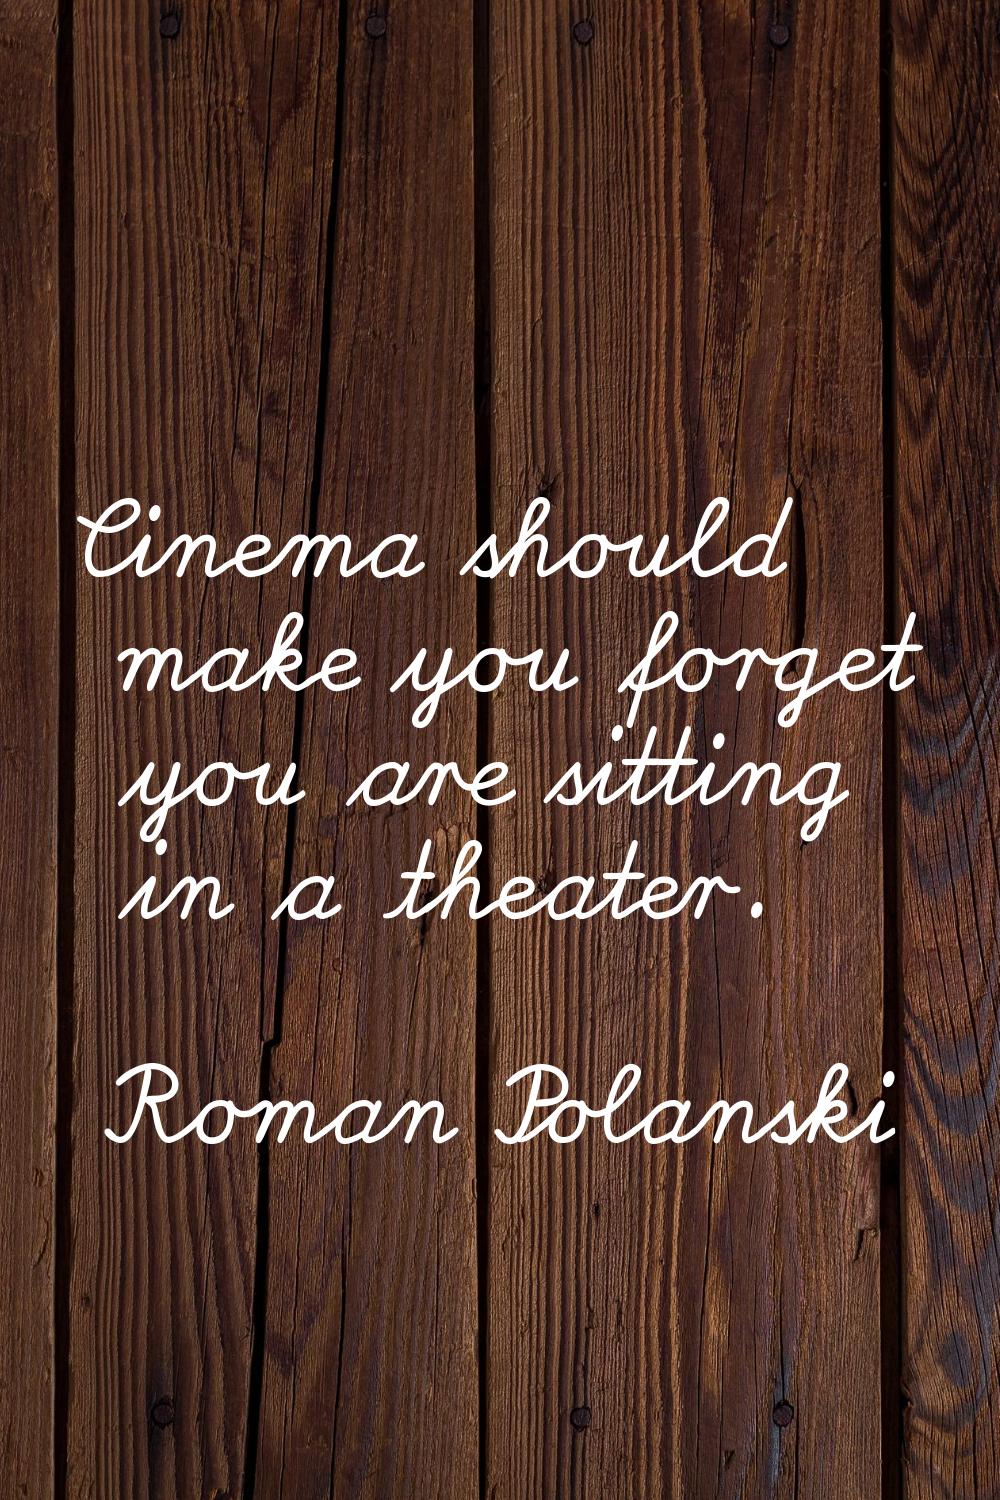 Cinema should make you forget you are sitting in a theater.